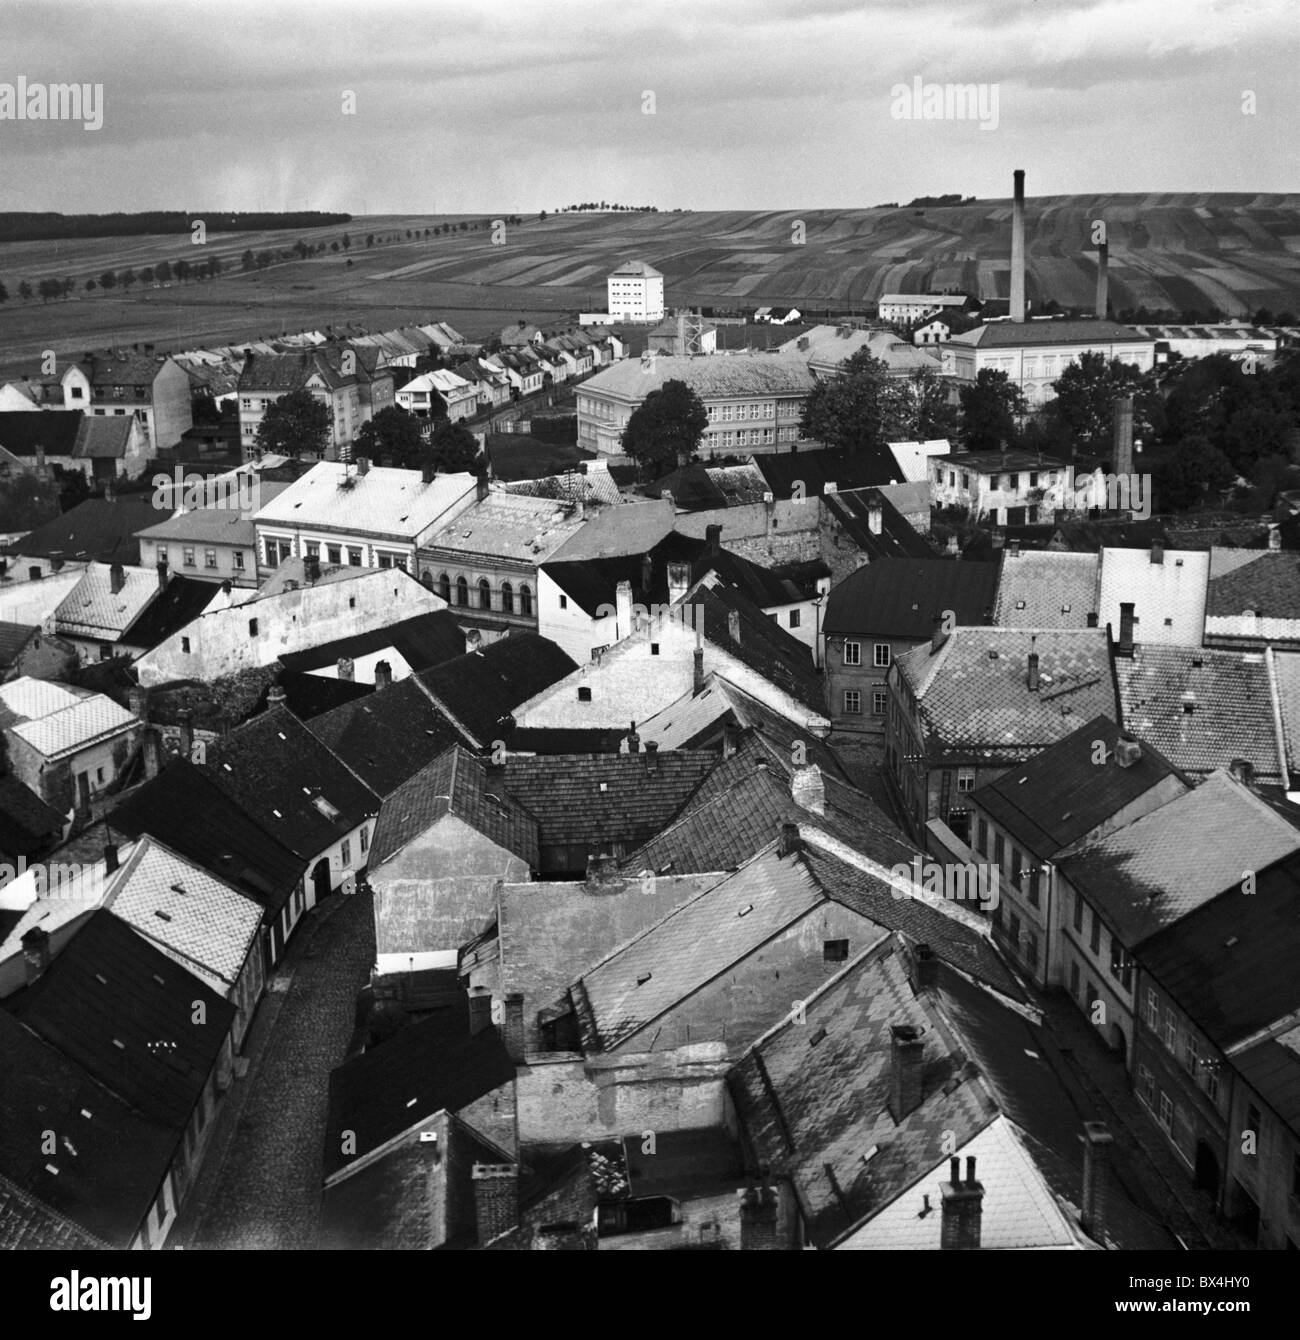 Czechoslovakia, border city of Policka which in 1938 was the center of turmoil between Sudeten Germans and Czechoslovak citizens. Many people were forcibly moved deeper inland. Stock Photo